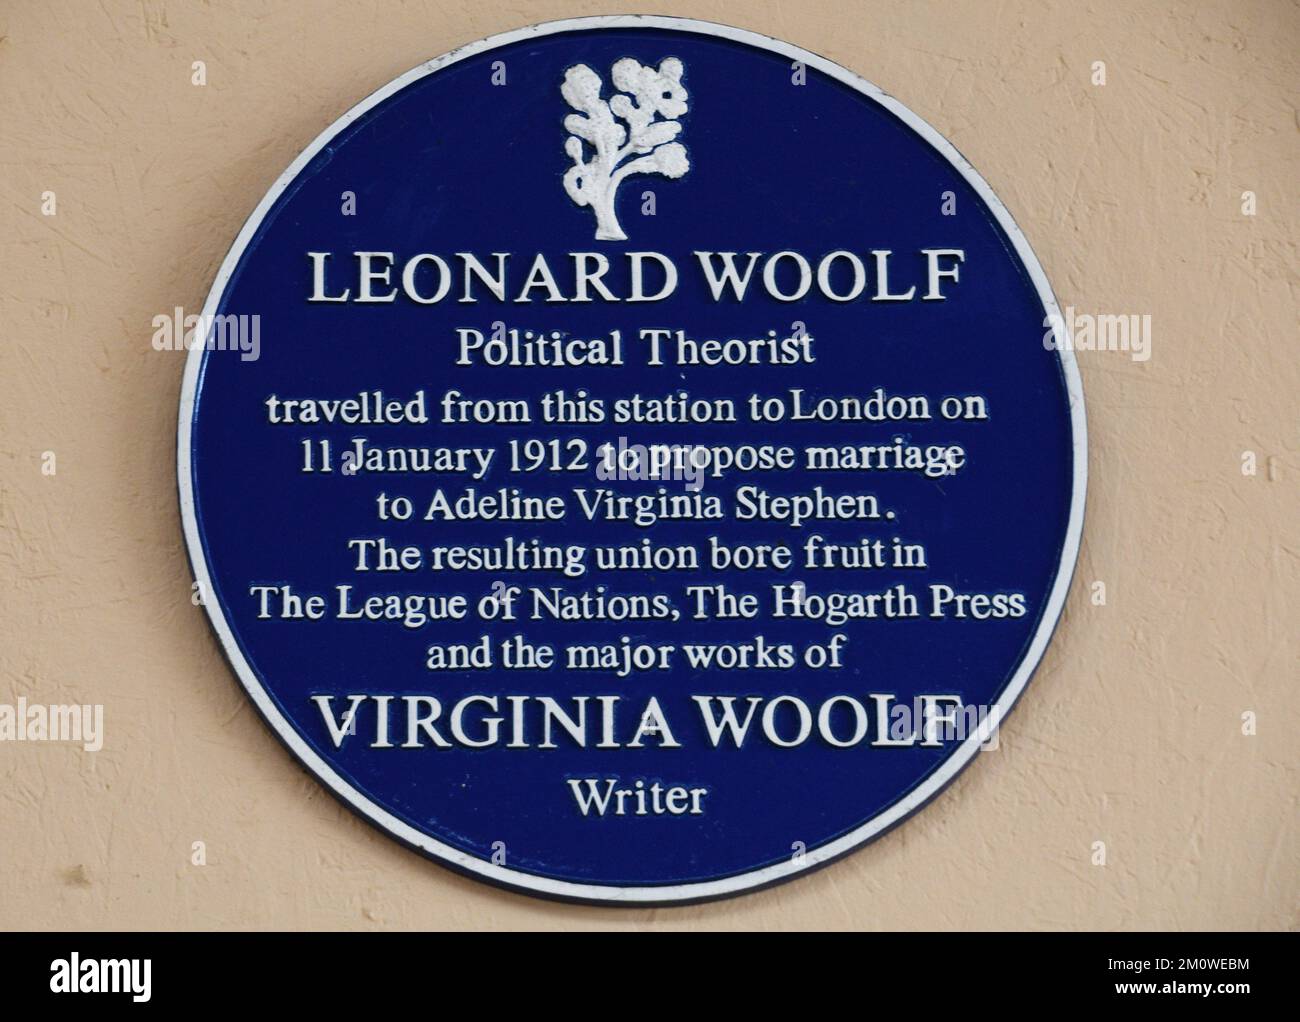 Blue plaque on the wall of Frome railway station concerning the departure of  Leonard Woolf to London to propose marriage to Adeline Virginia Stephen Stock Photo